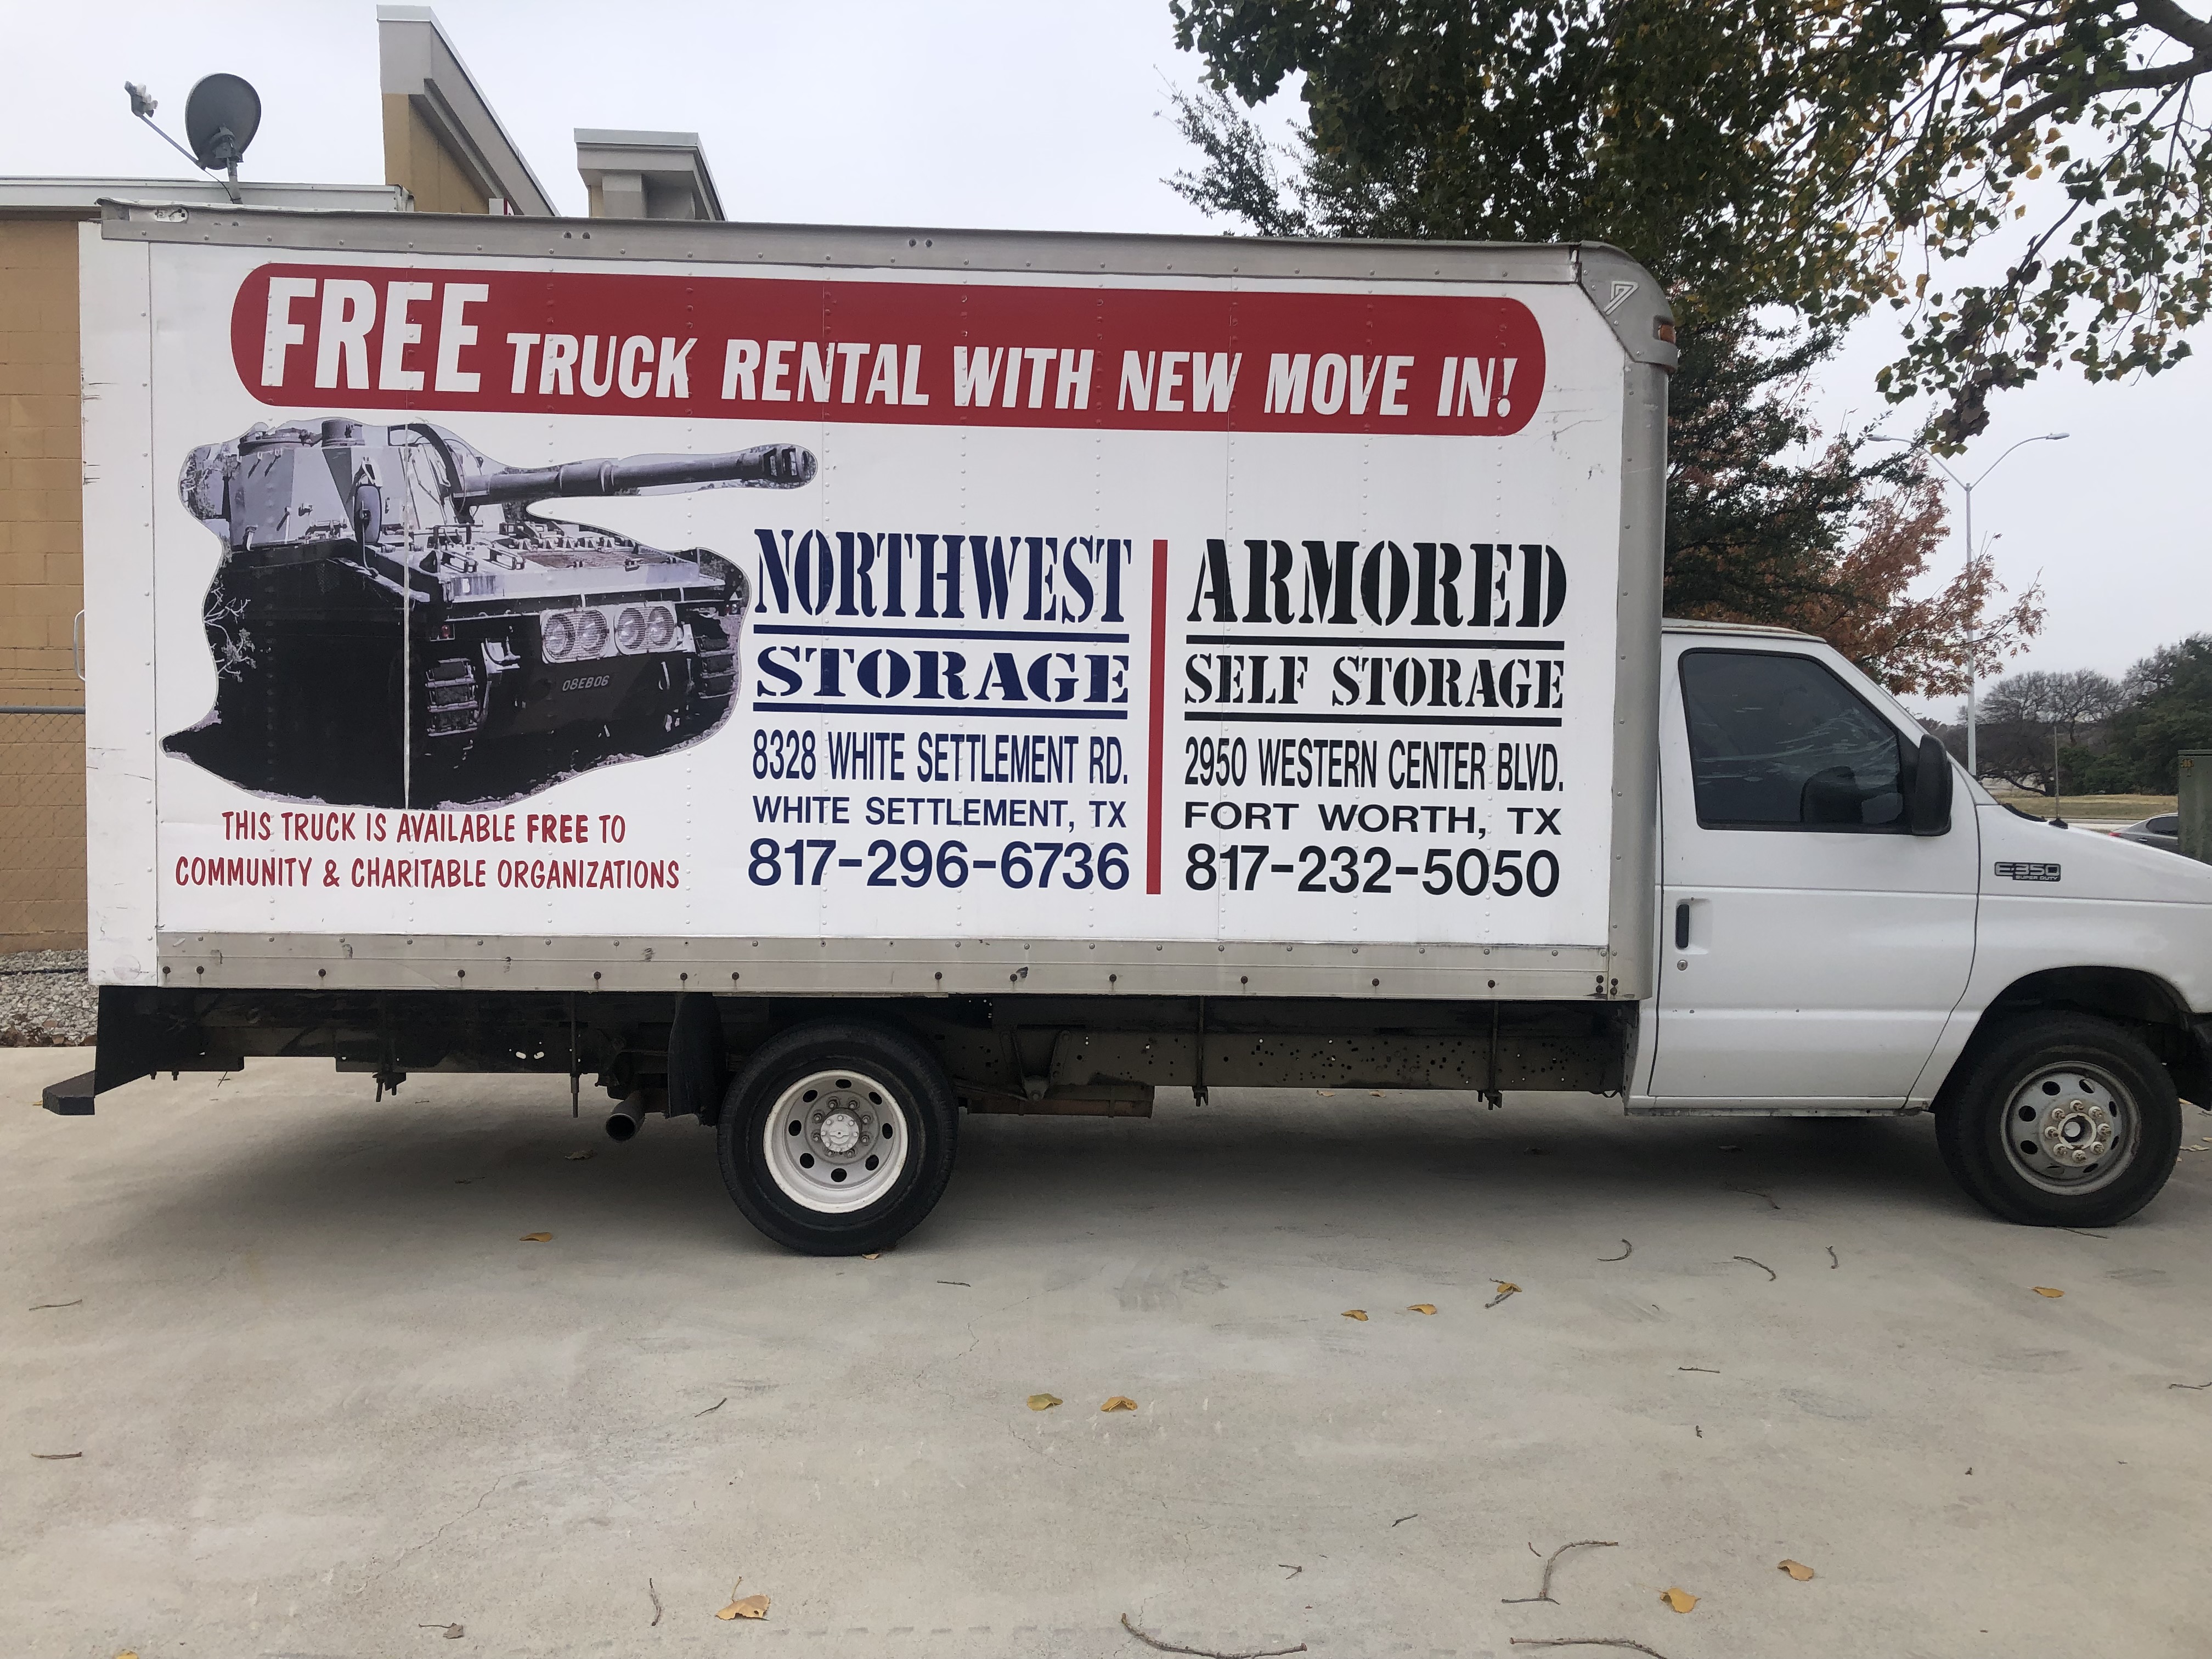 Free truck rental at Armored Self Storage in Fort Worth